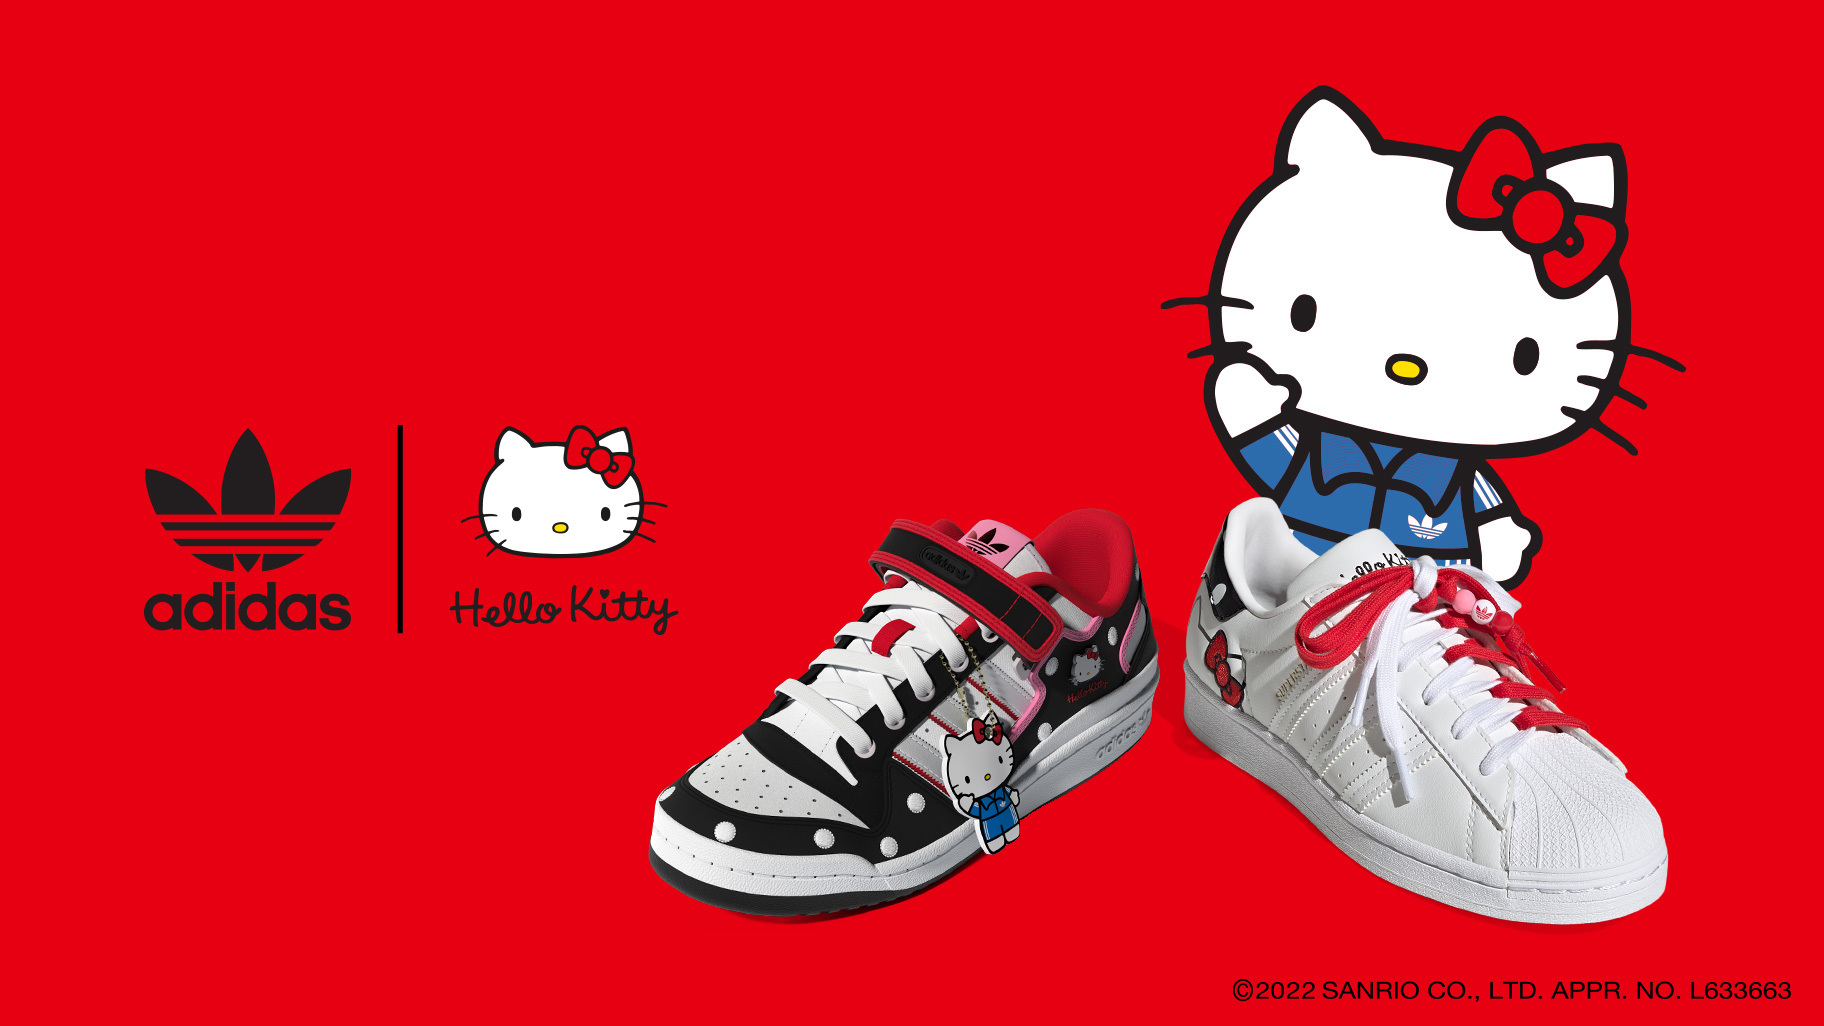 Adidas adorable Hello Kitty collection of sneakers and accessories